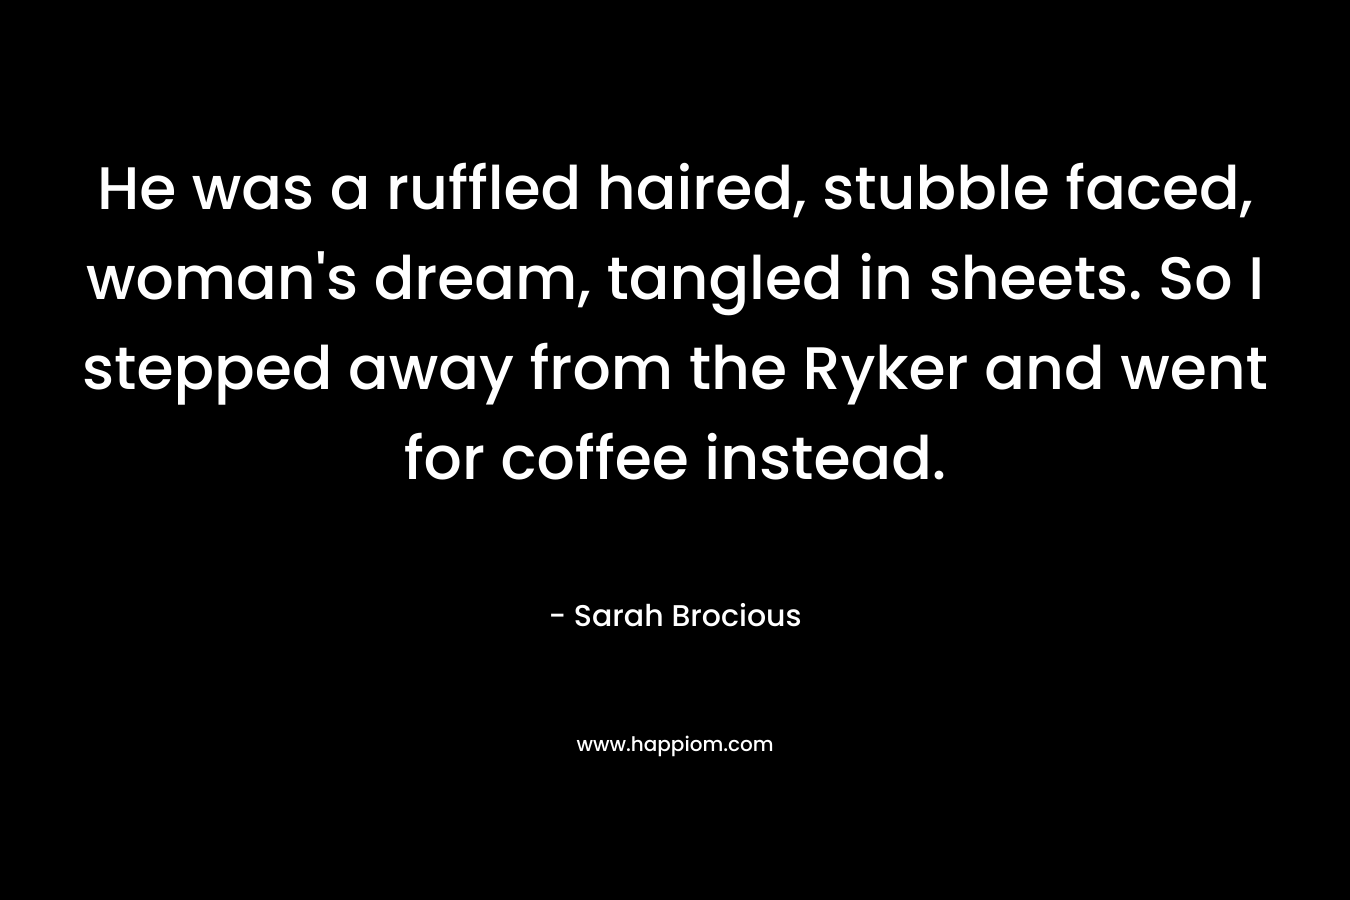 He was a ruffled haired, stubble faced, woman’s dream, tangled in sheets. So I stepped away from the Ryker and went for coffee instead. – Sarah Brocious